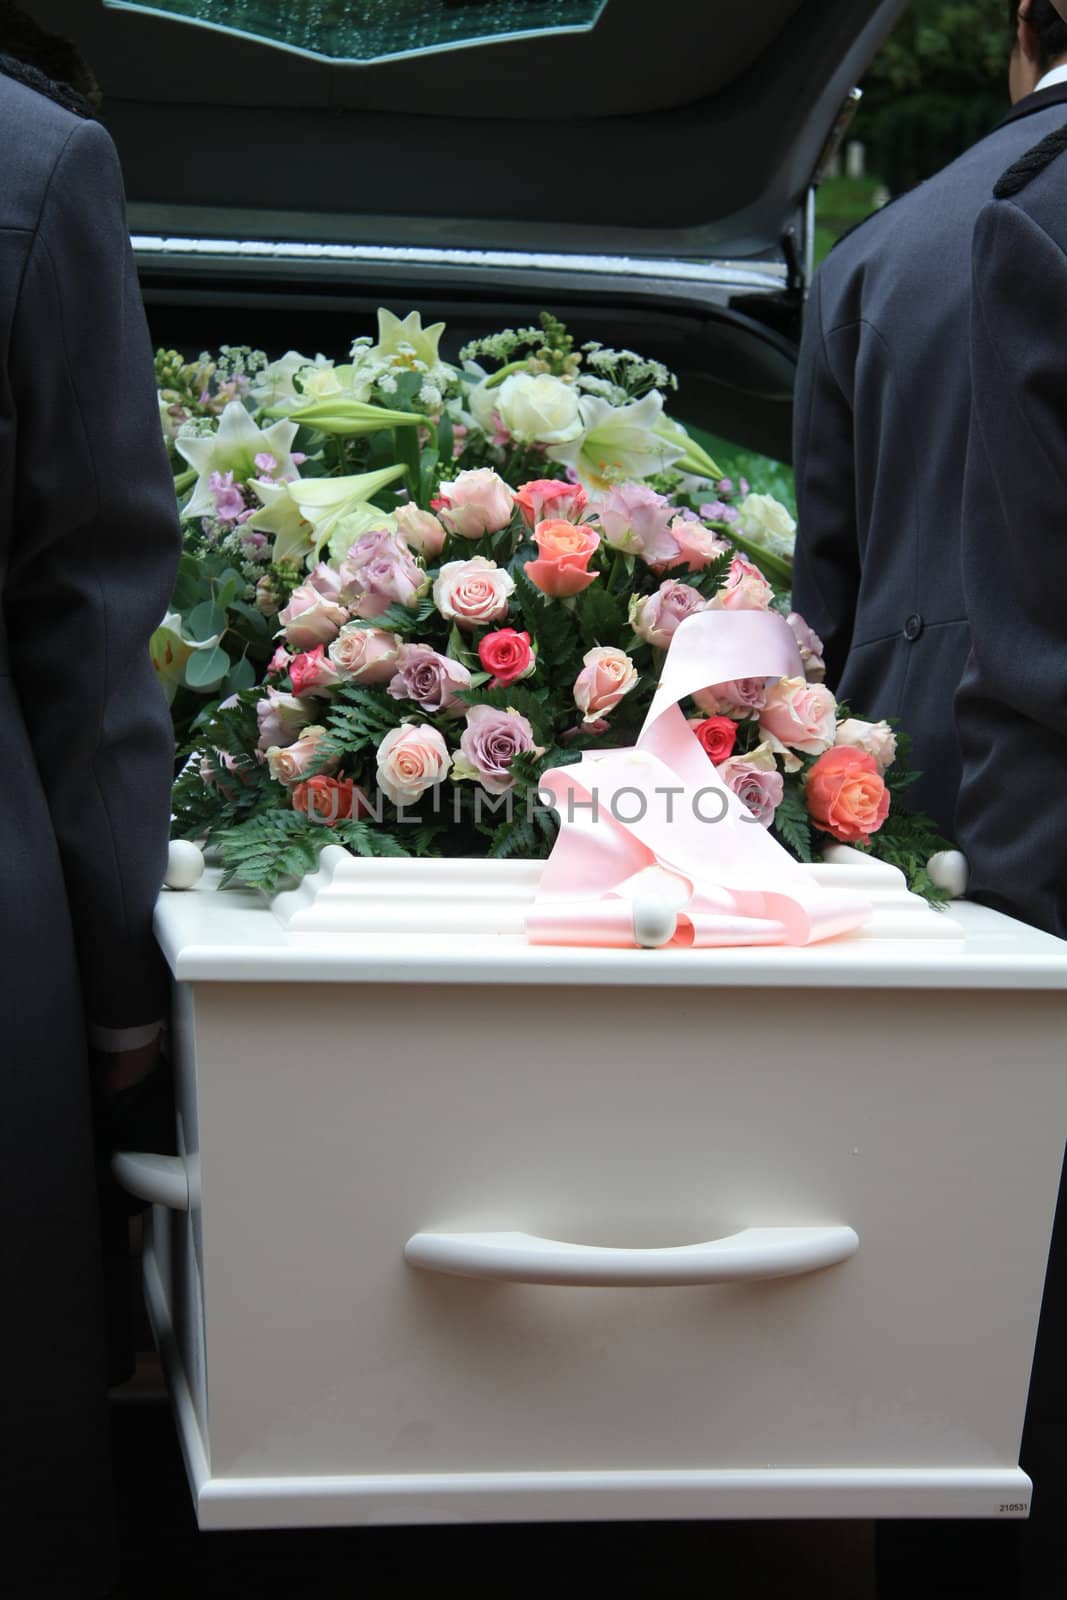 A white coffin, covered with flowers near a hearse, people taking out the coffin